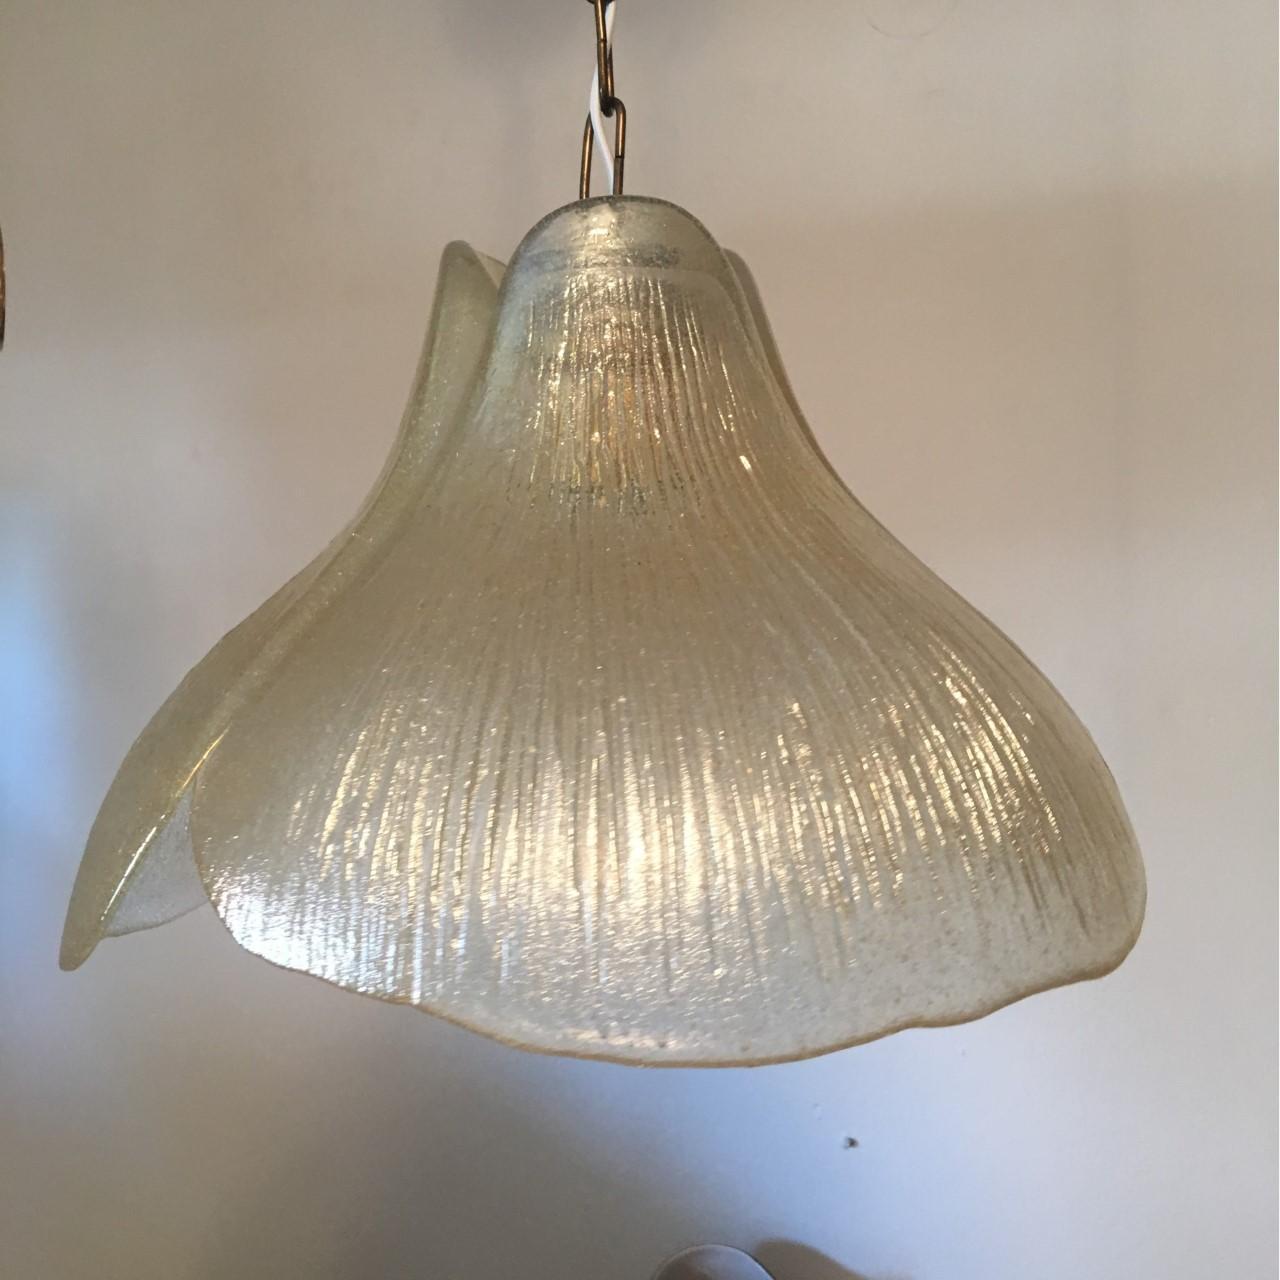 Lovely 1970s glass pendant in flower form by the German Company Peill & Putzler. In the USA these models were distributed under the name of Koch & Lowy. The fixture requires one European E26 / E27 Edison bulbs the bulb up to 150 watts. Rewired to